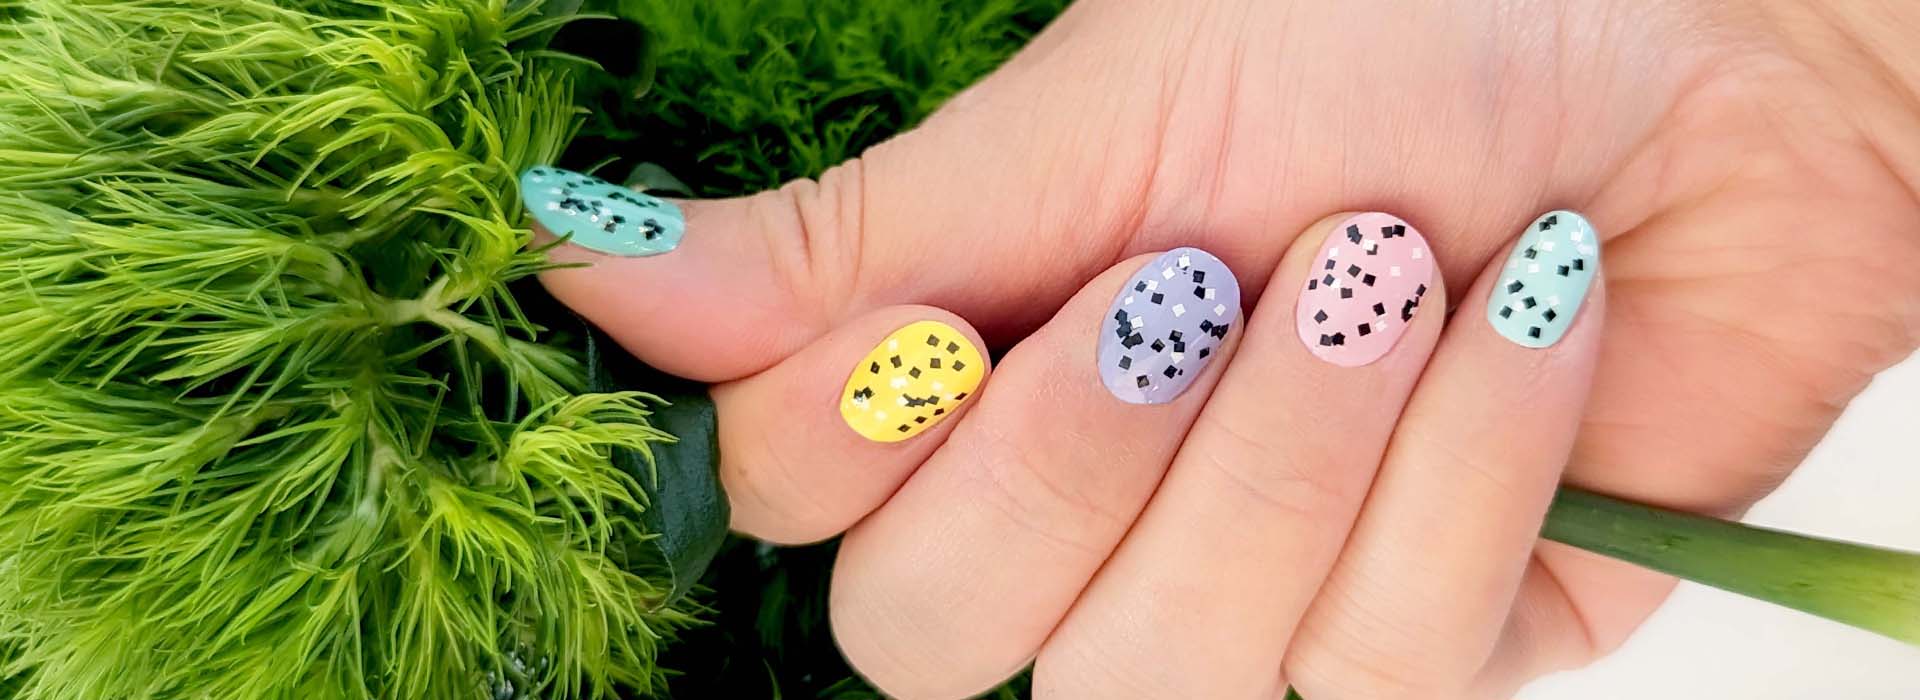 9. Pretty Pastel Nail Designs for Girls - wide 7